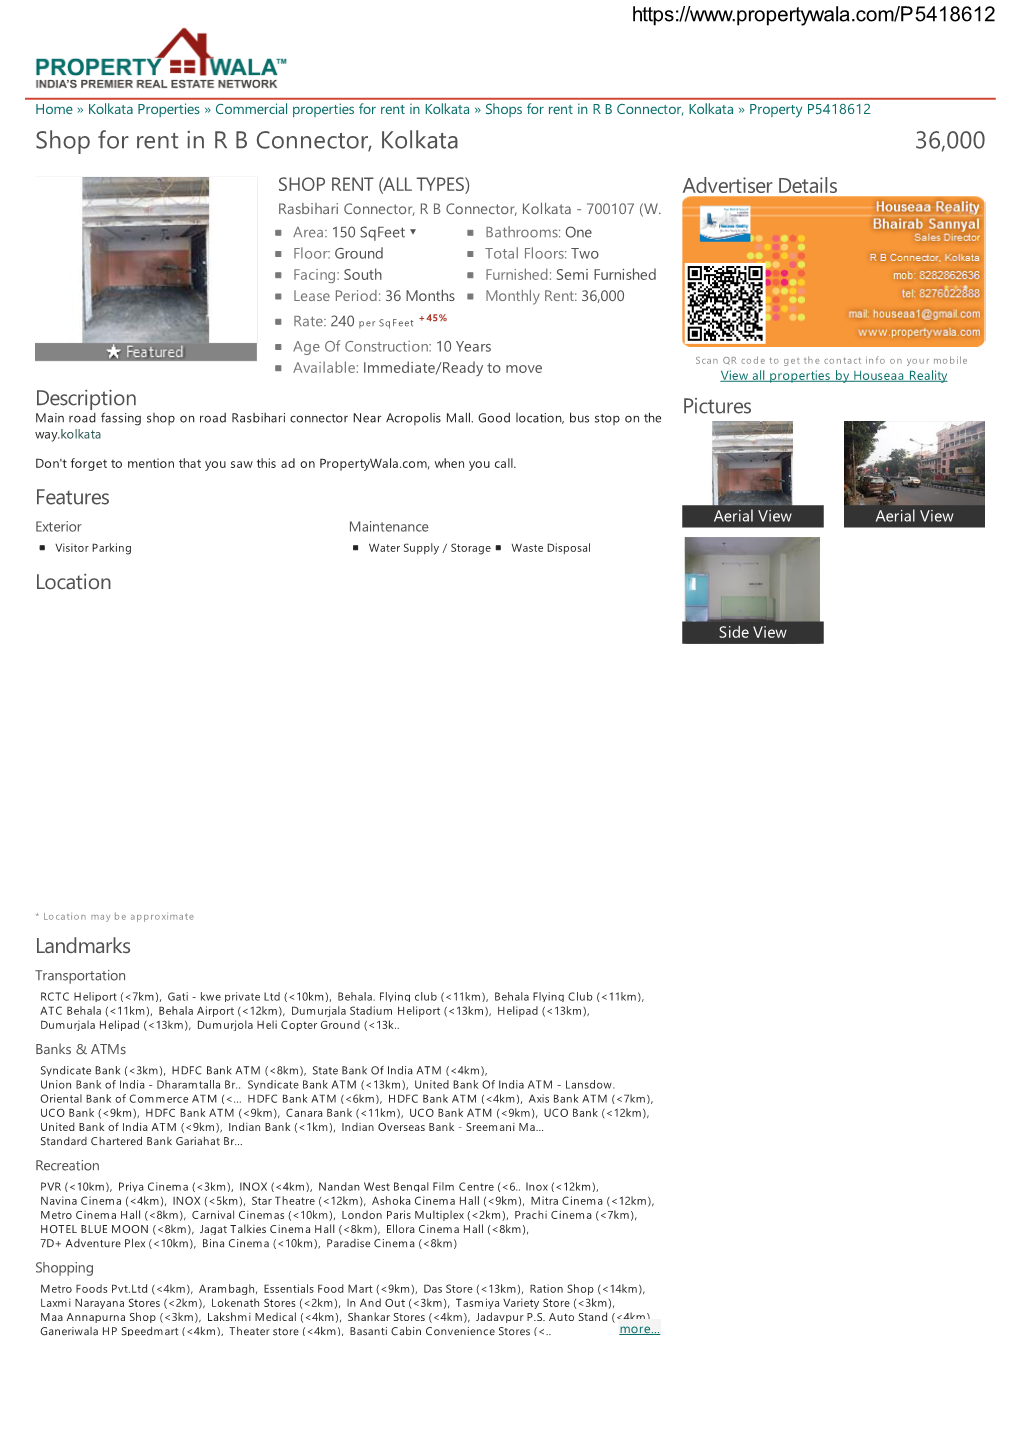 Shop for Rent in R B Connector, Kolkata (P5418612)